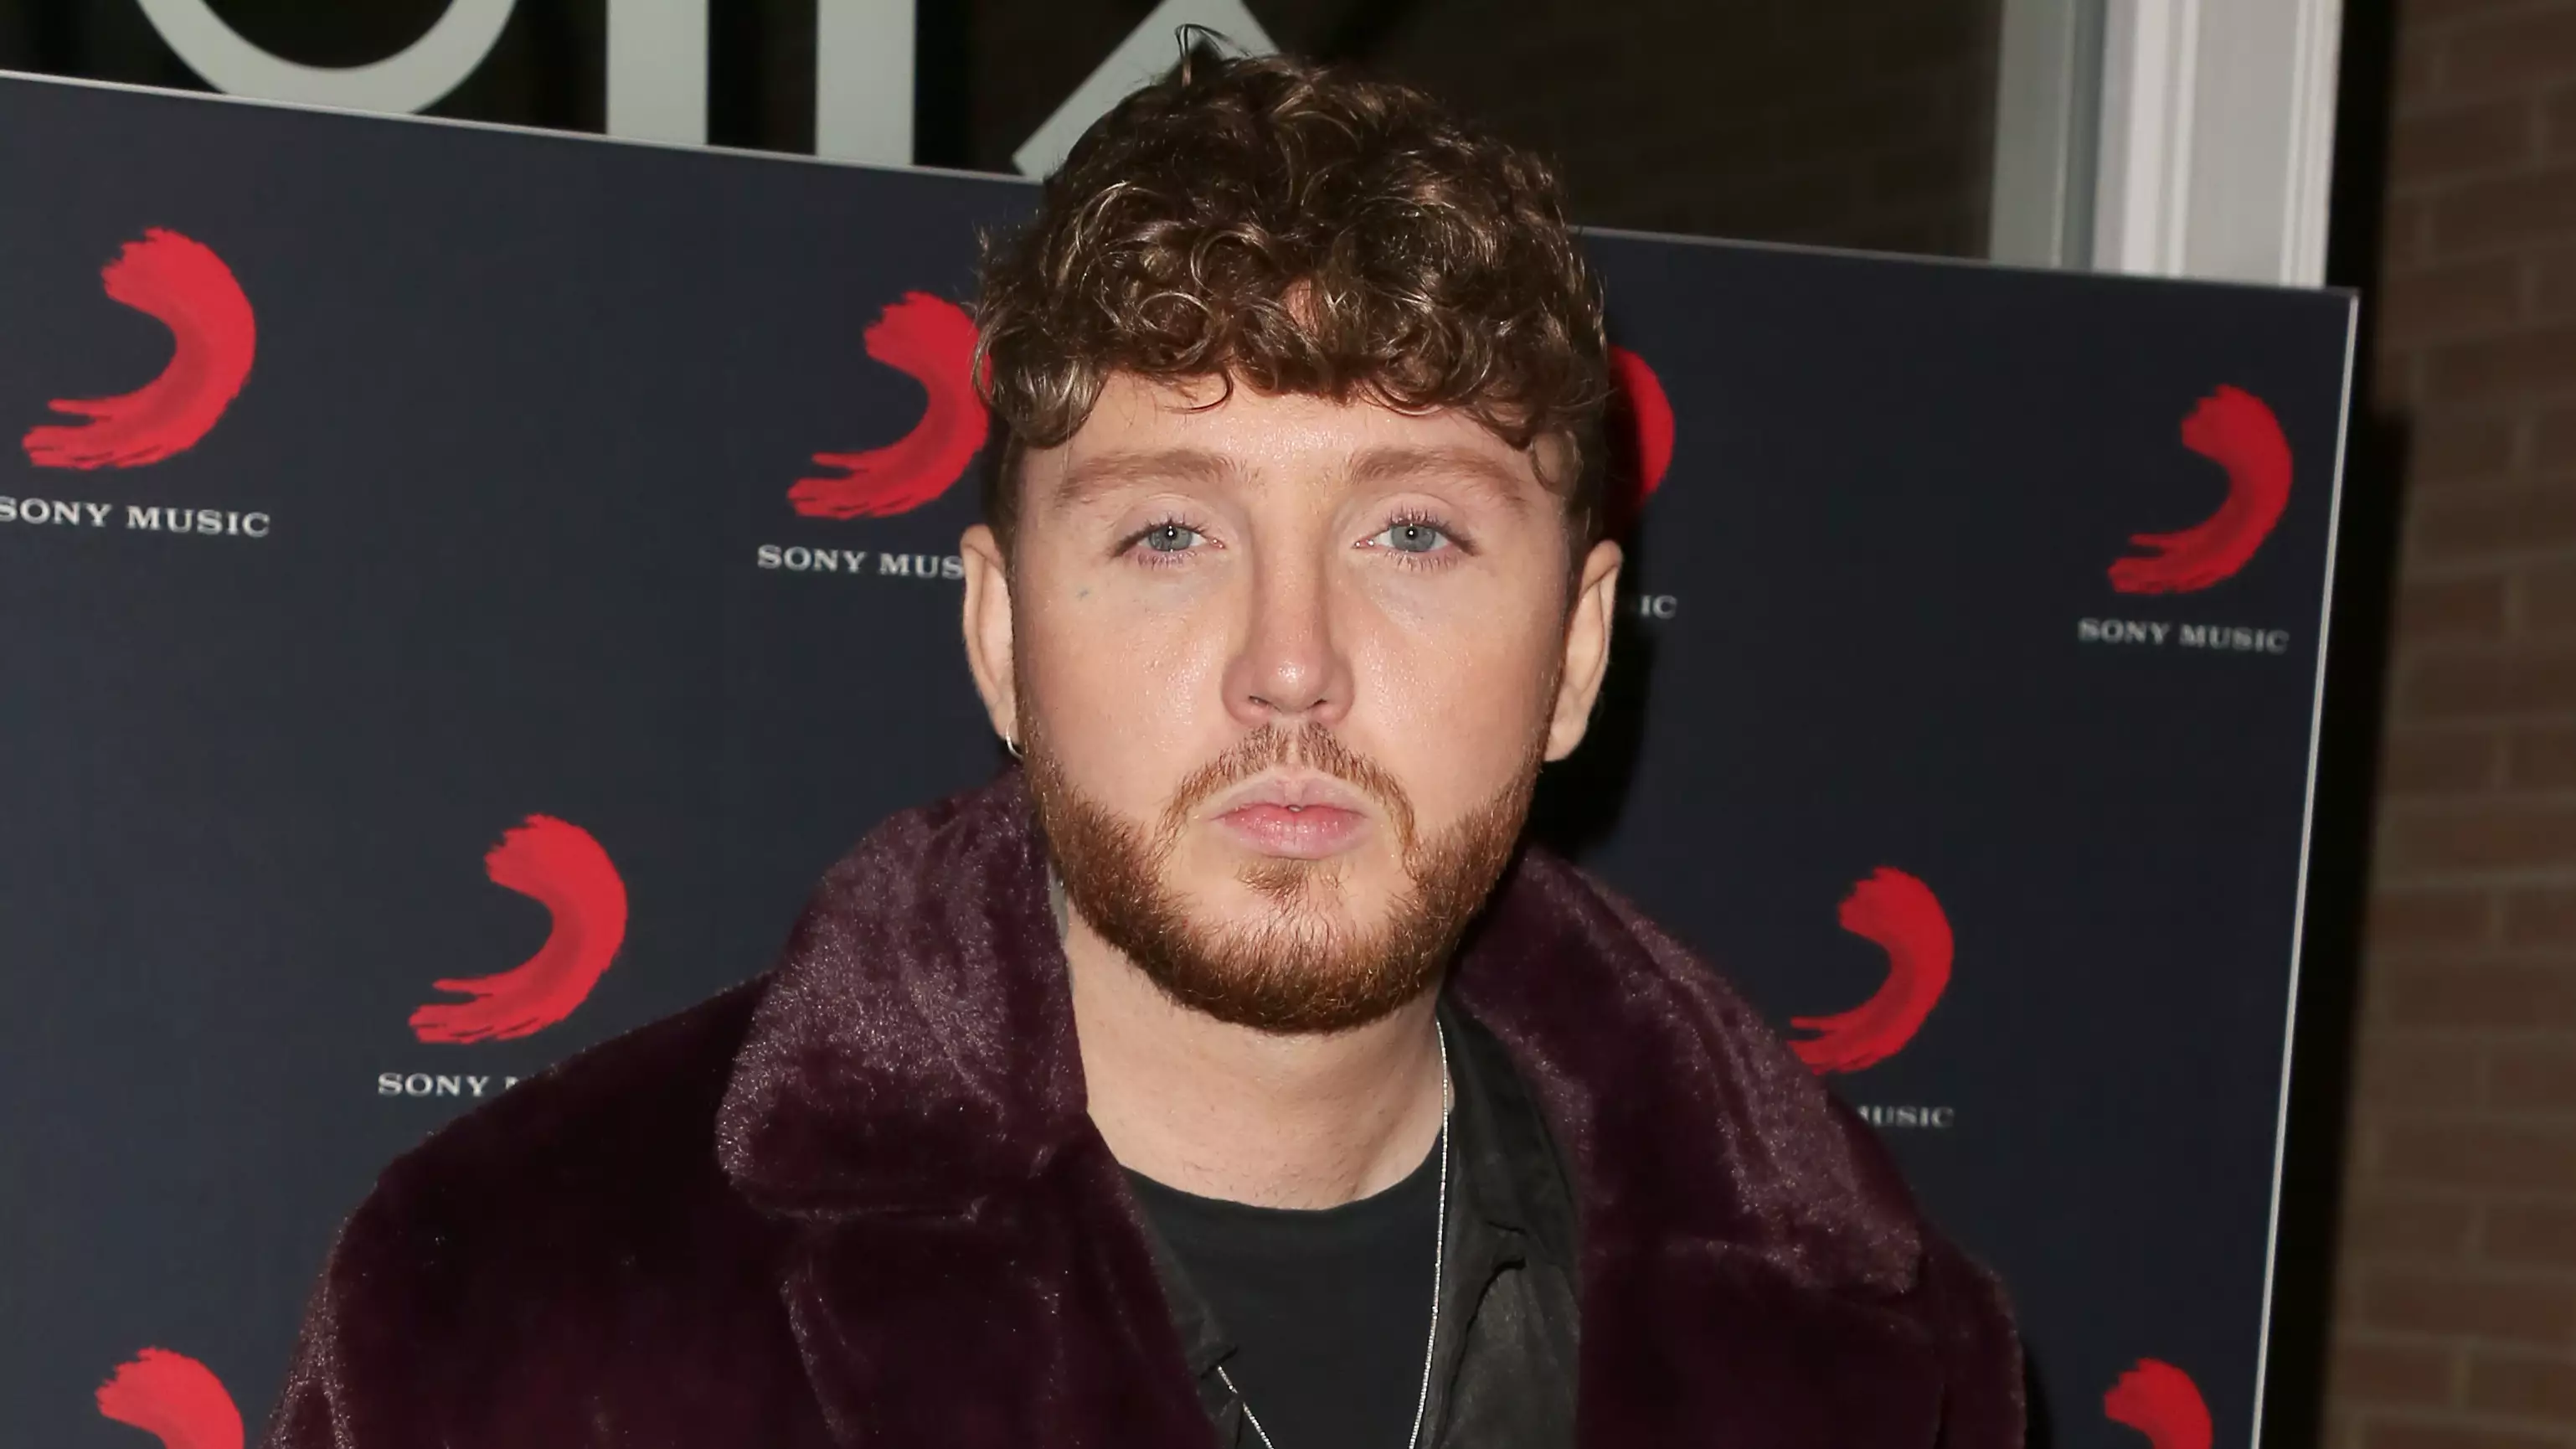 James Arthur ‘Didn’t Realise’ He Was £300,000 In Debt Due To Gambling